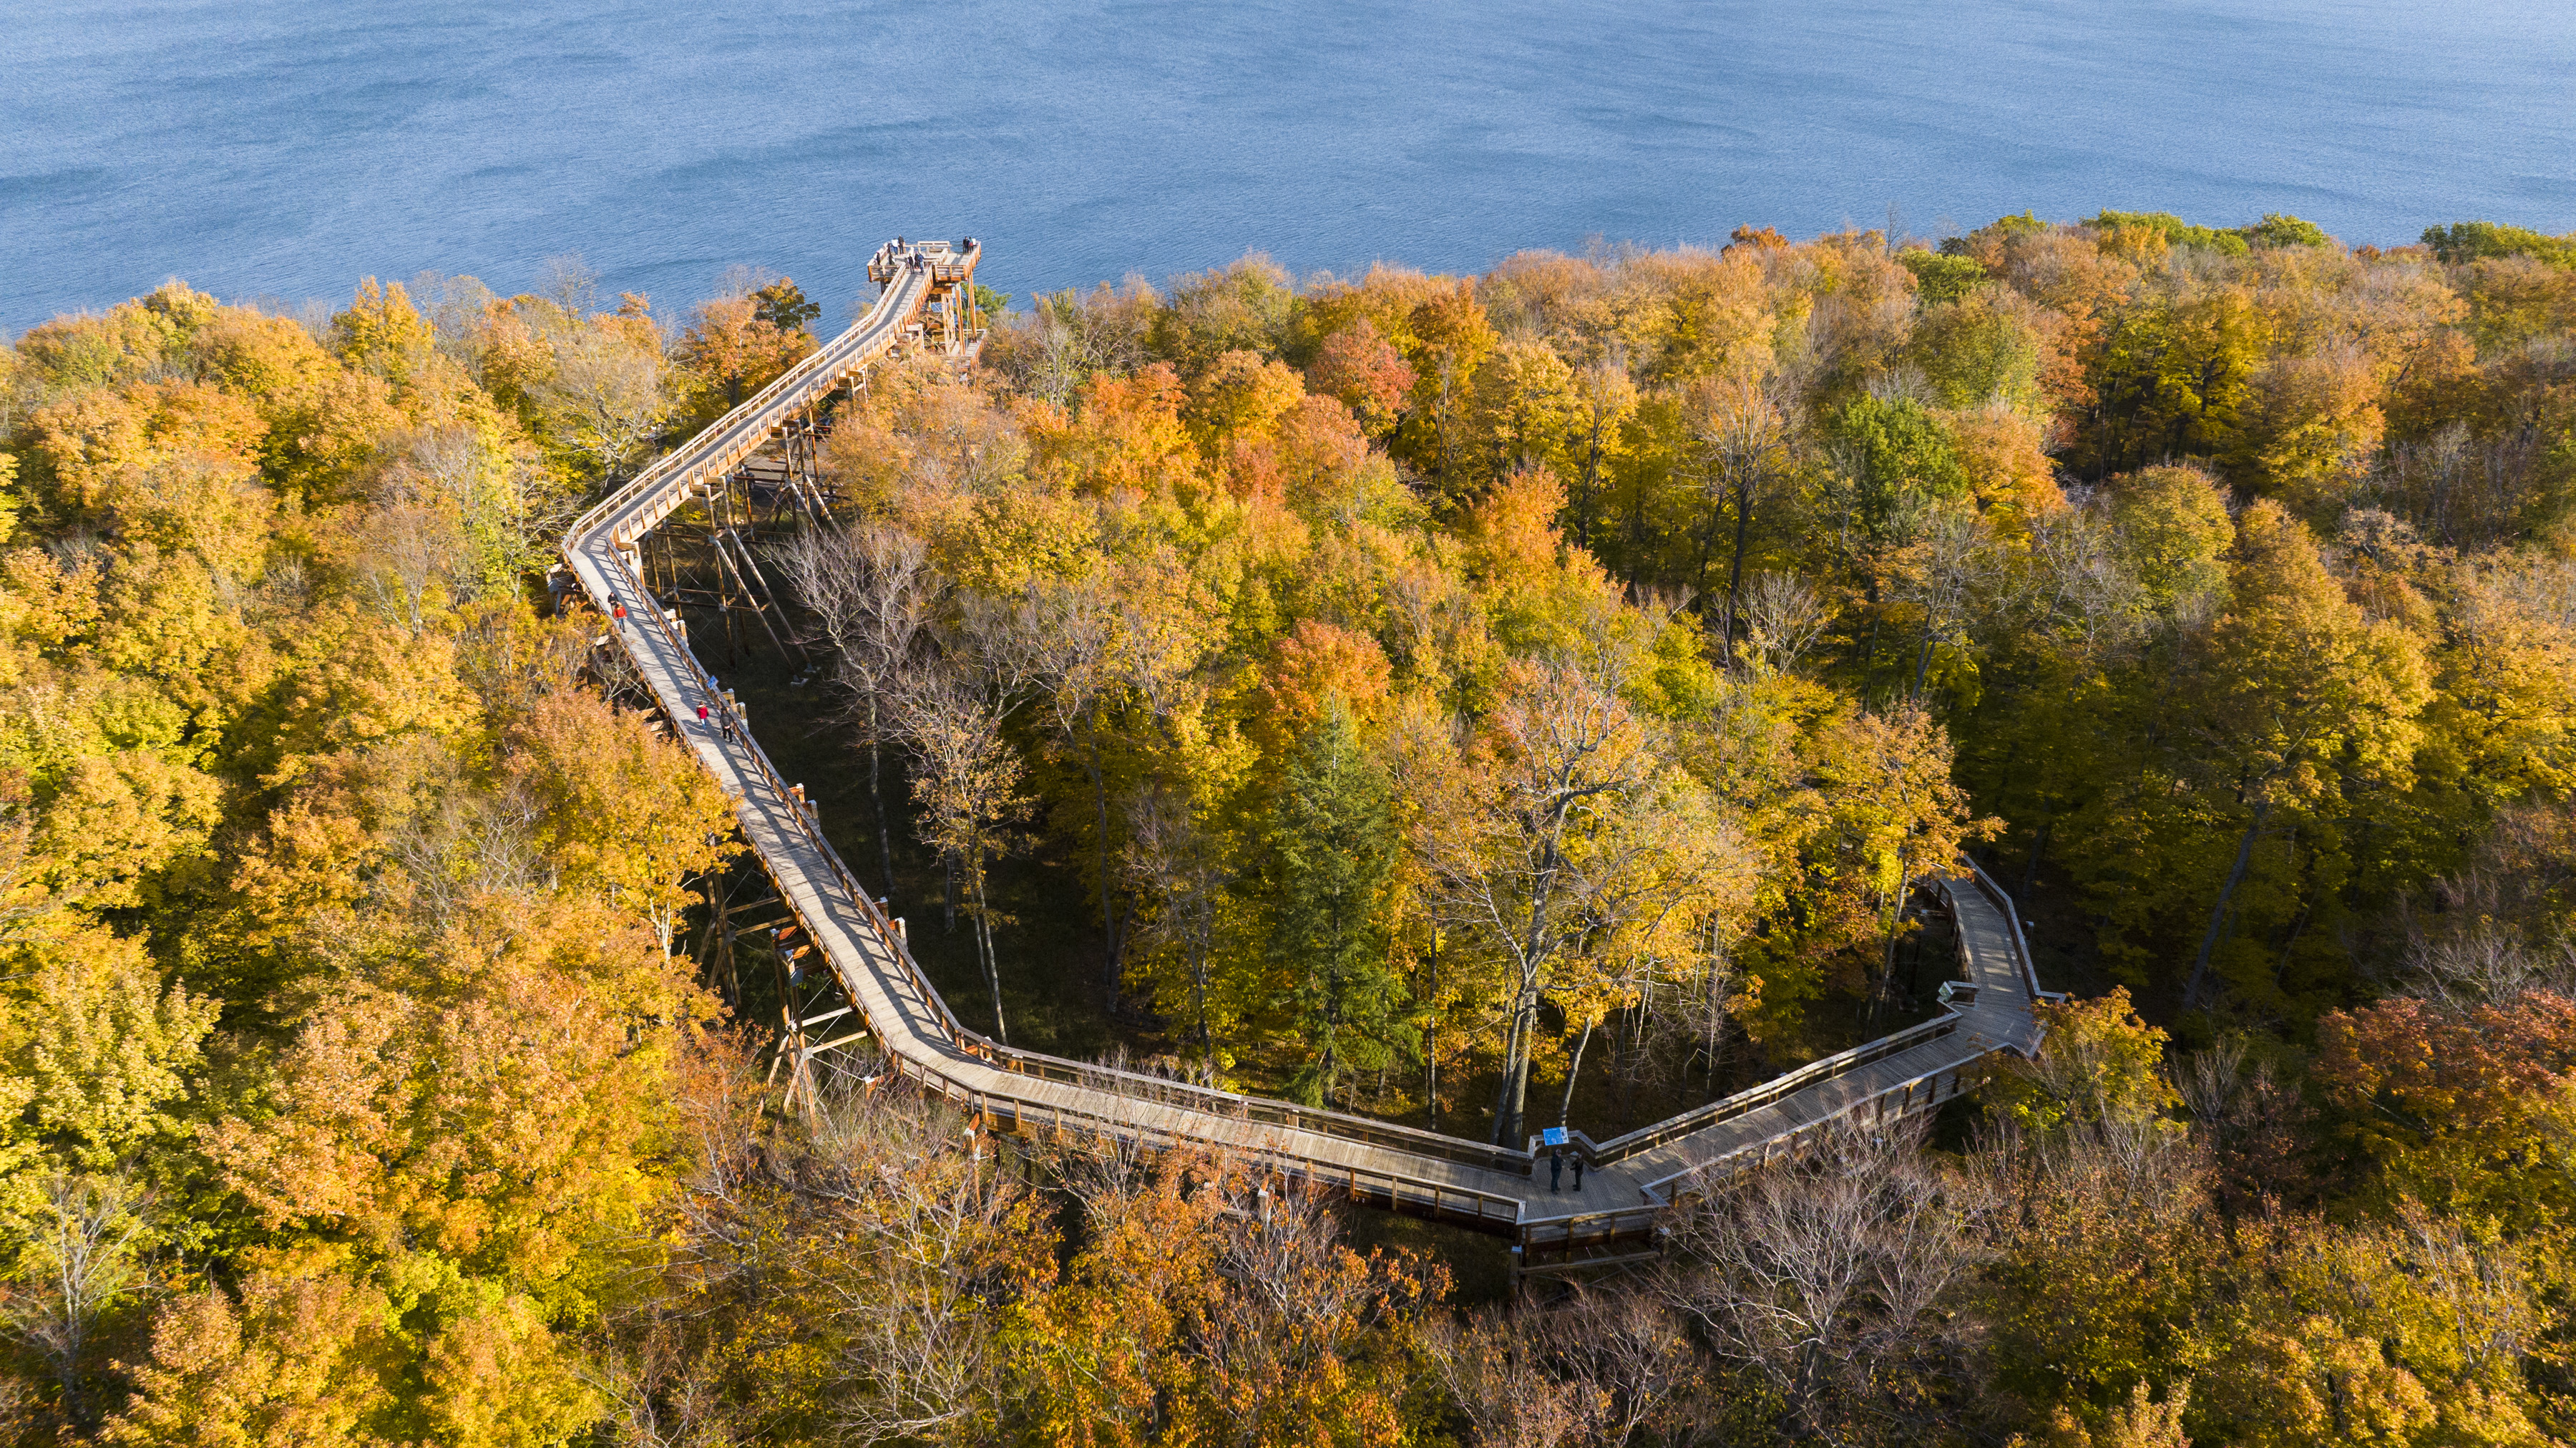 An aerial view of Eagle Tower located inside Peninsula State Park.